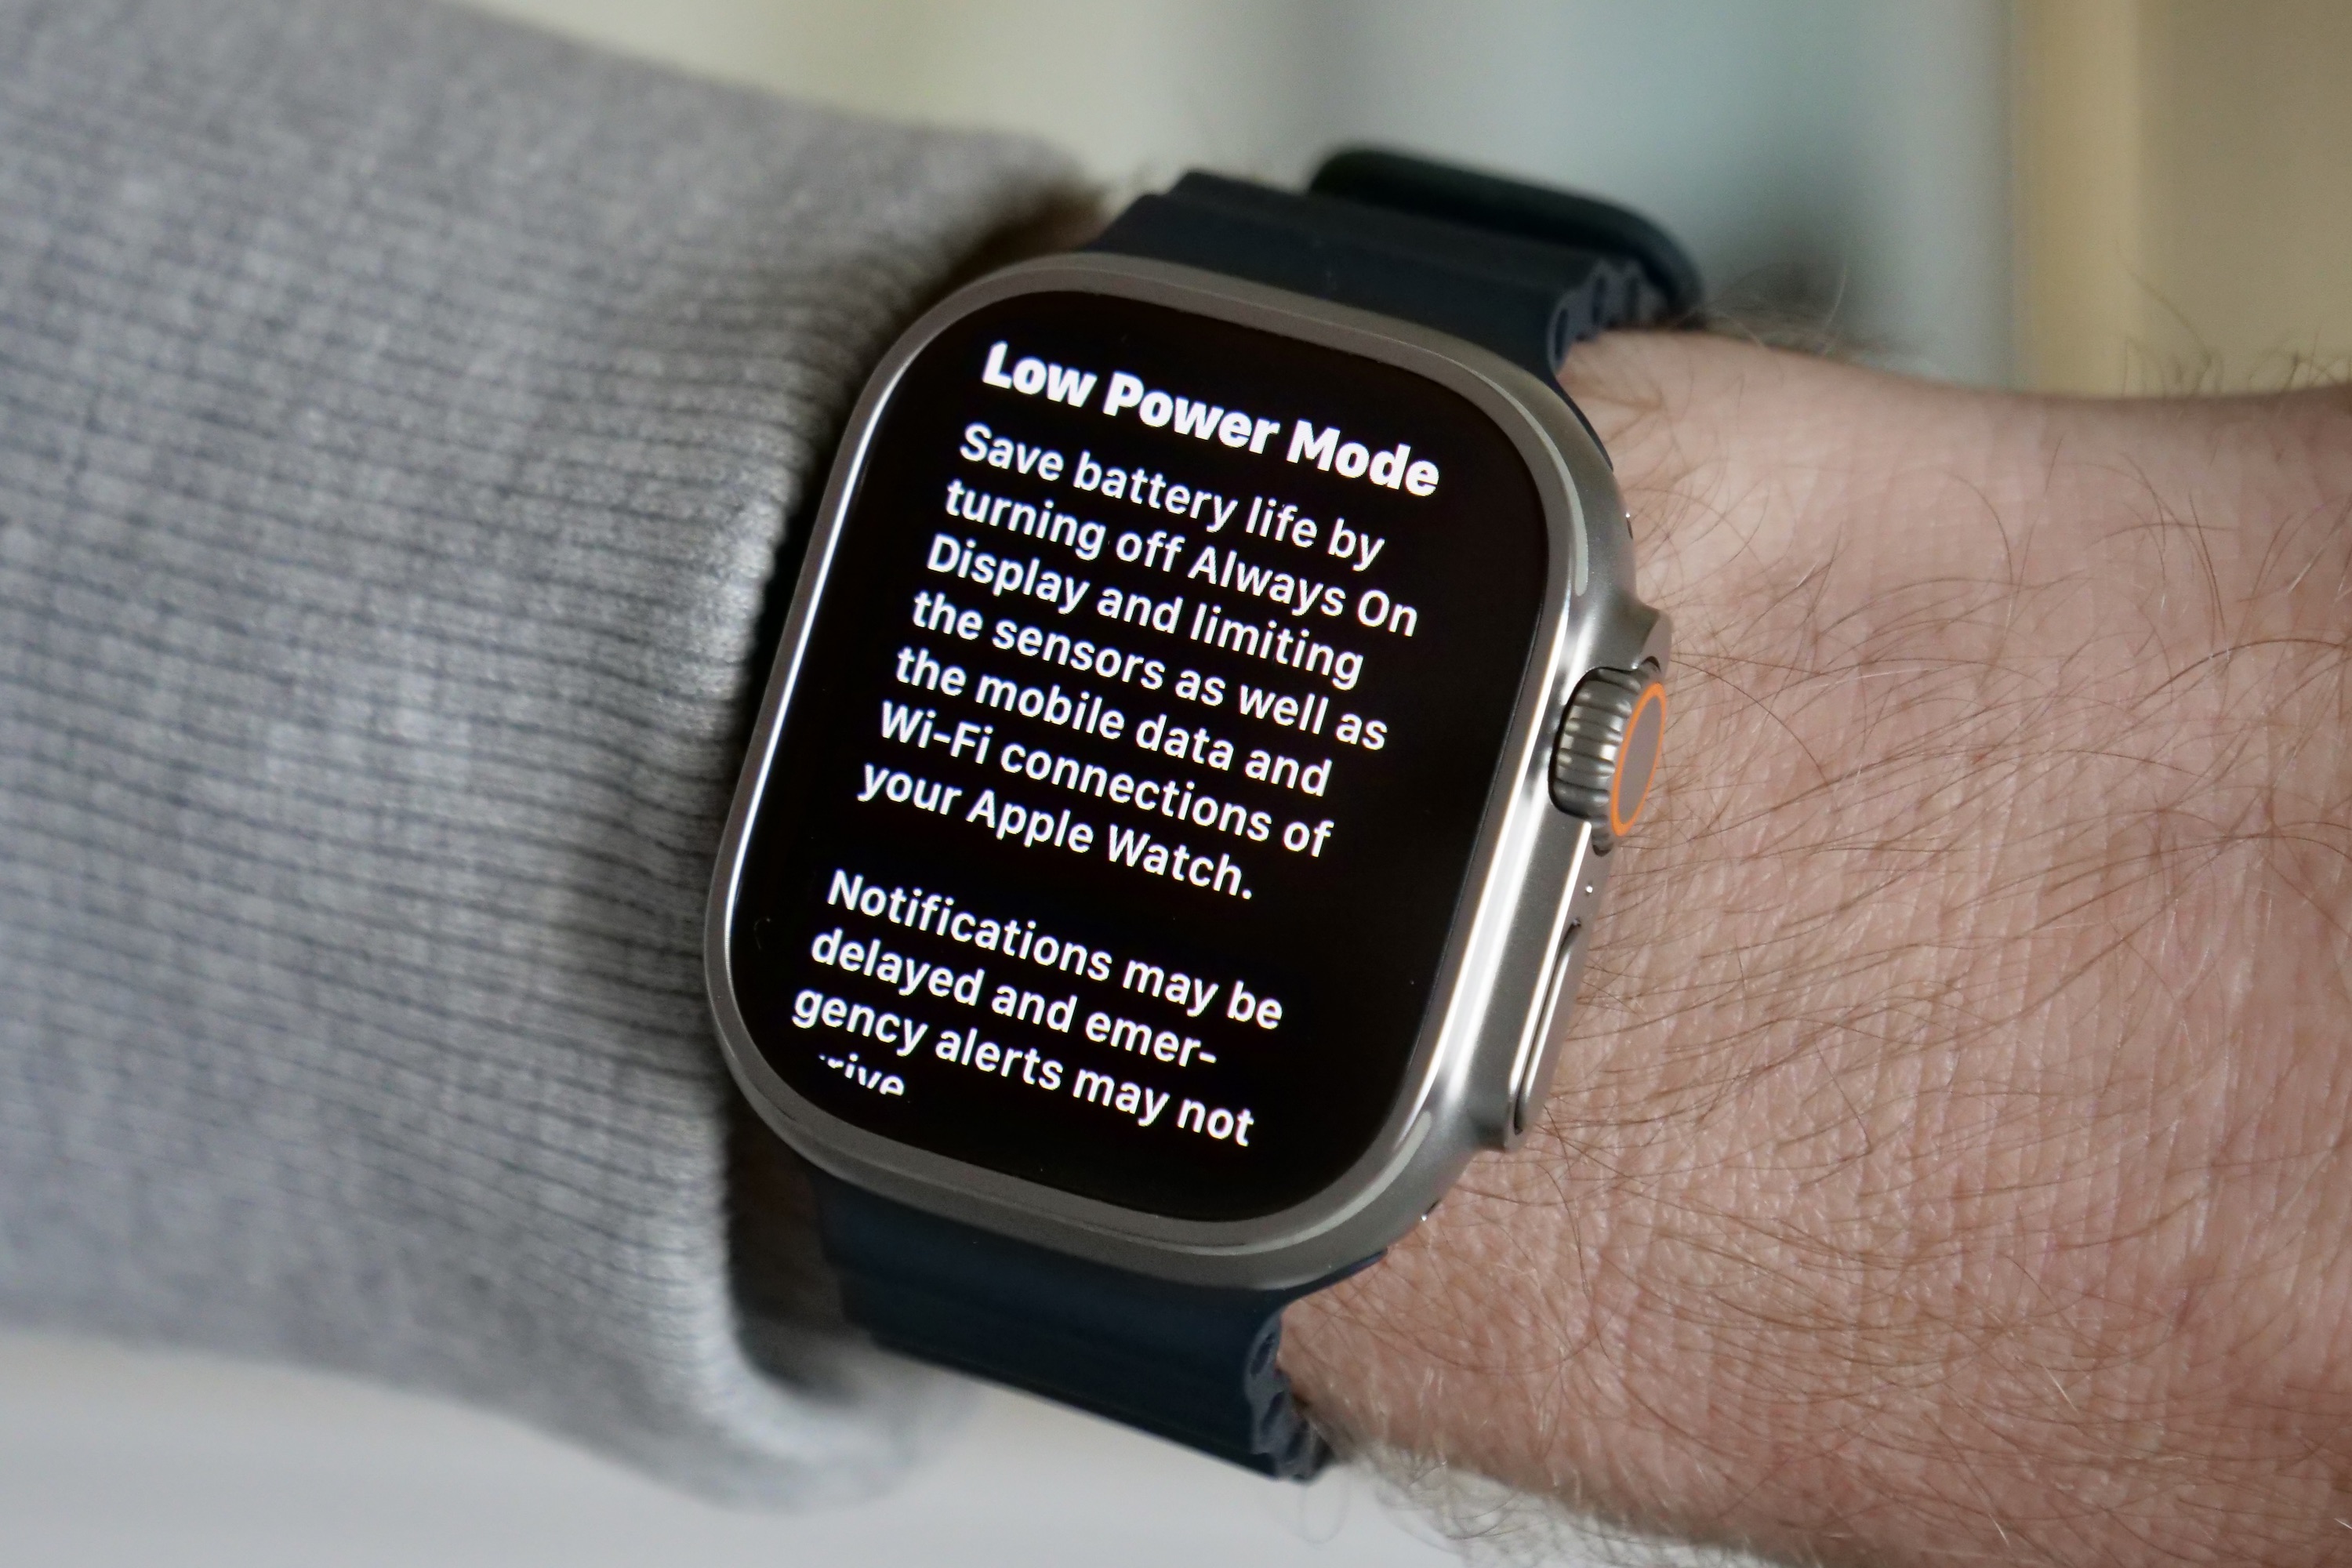 Low Power Mode totally changed the way I use my Apple Watch
Ultra